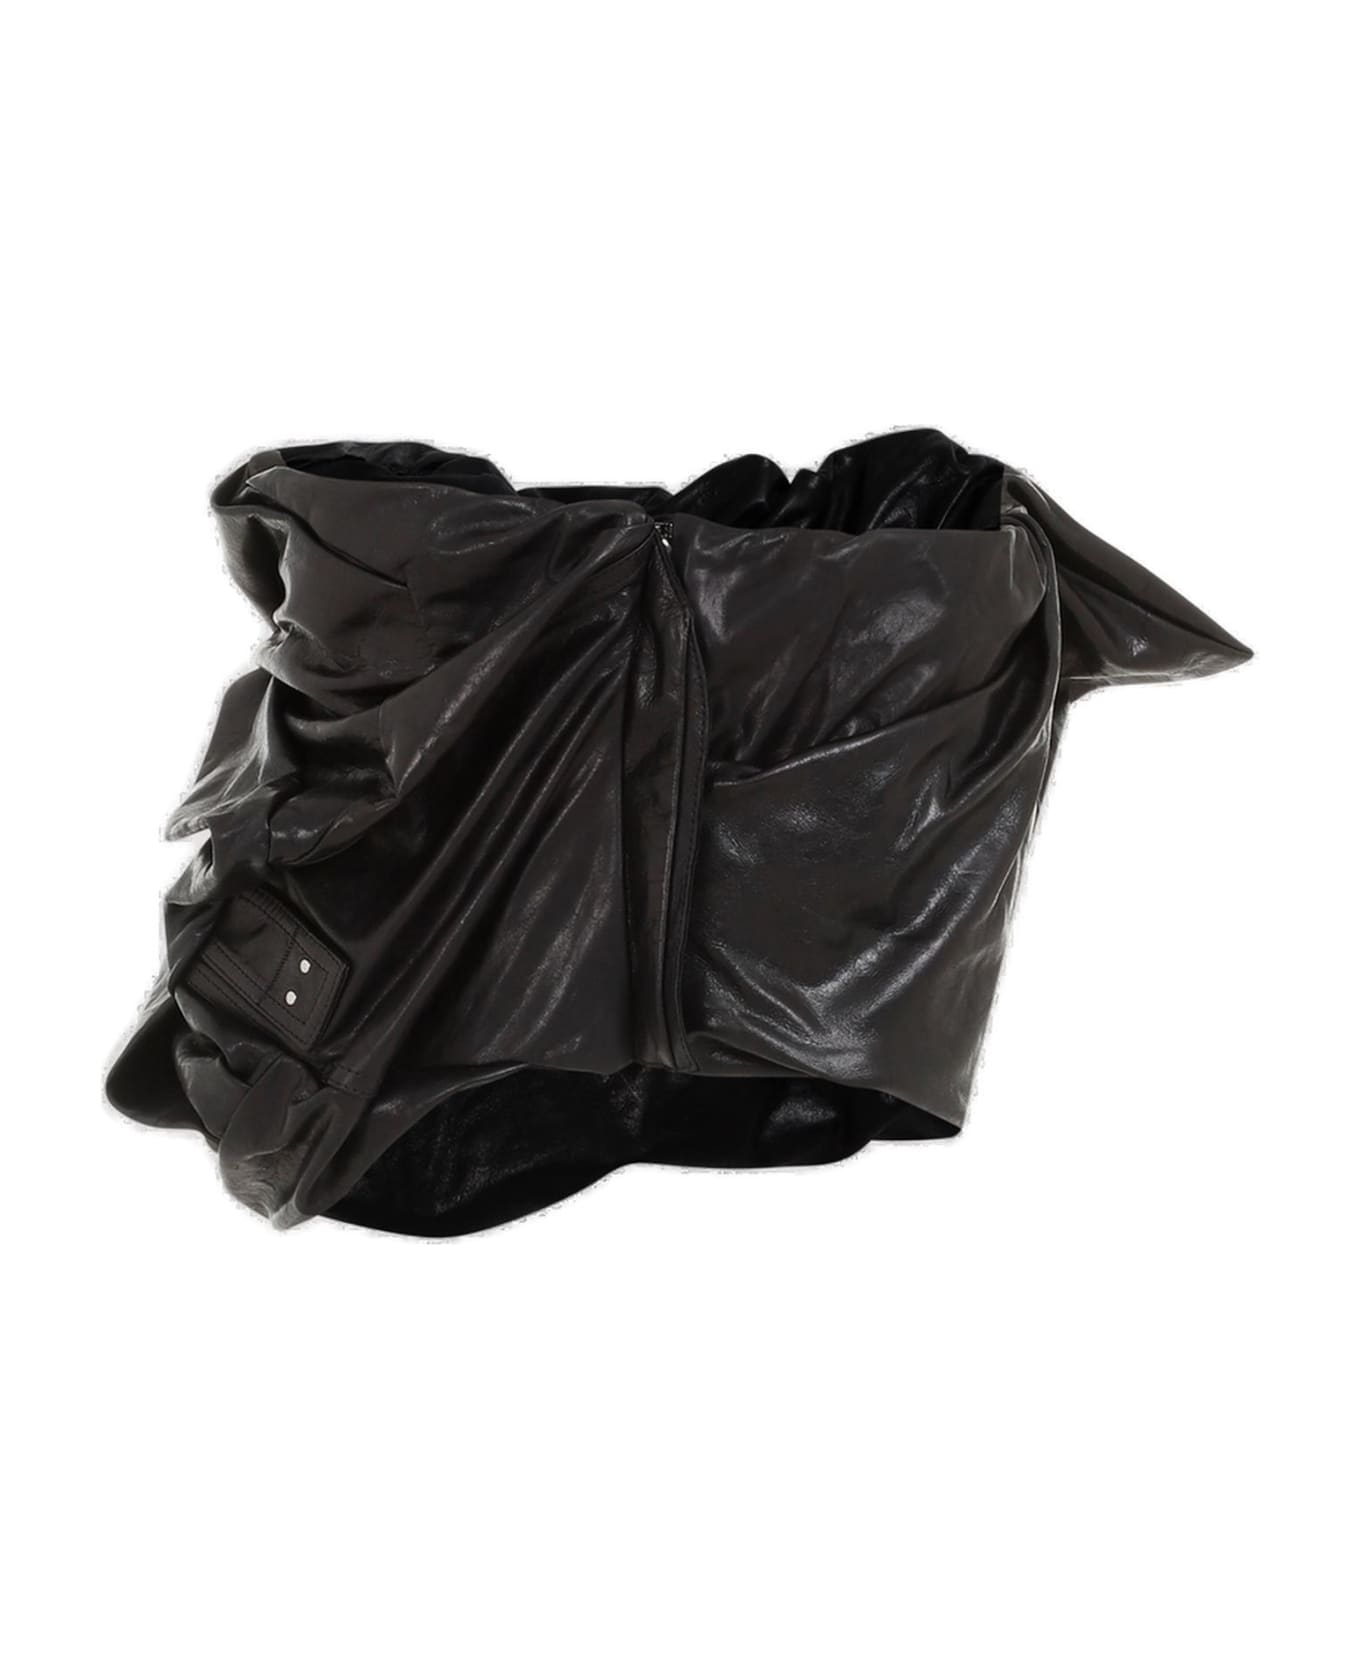 Rick Owens Draped Bustier Leather Top - Black